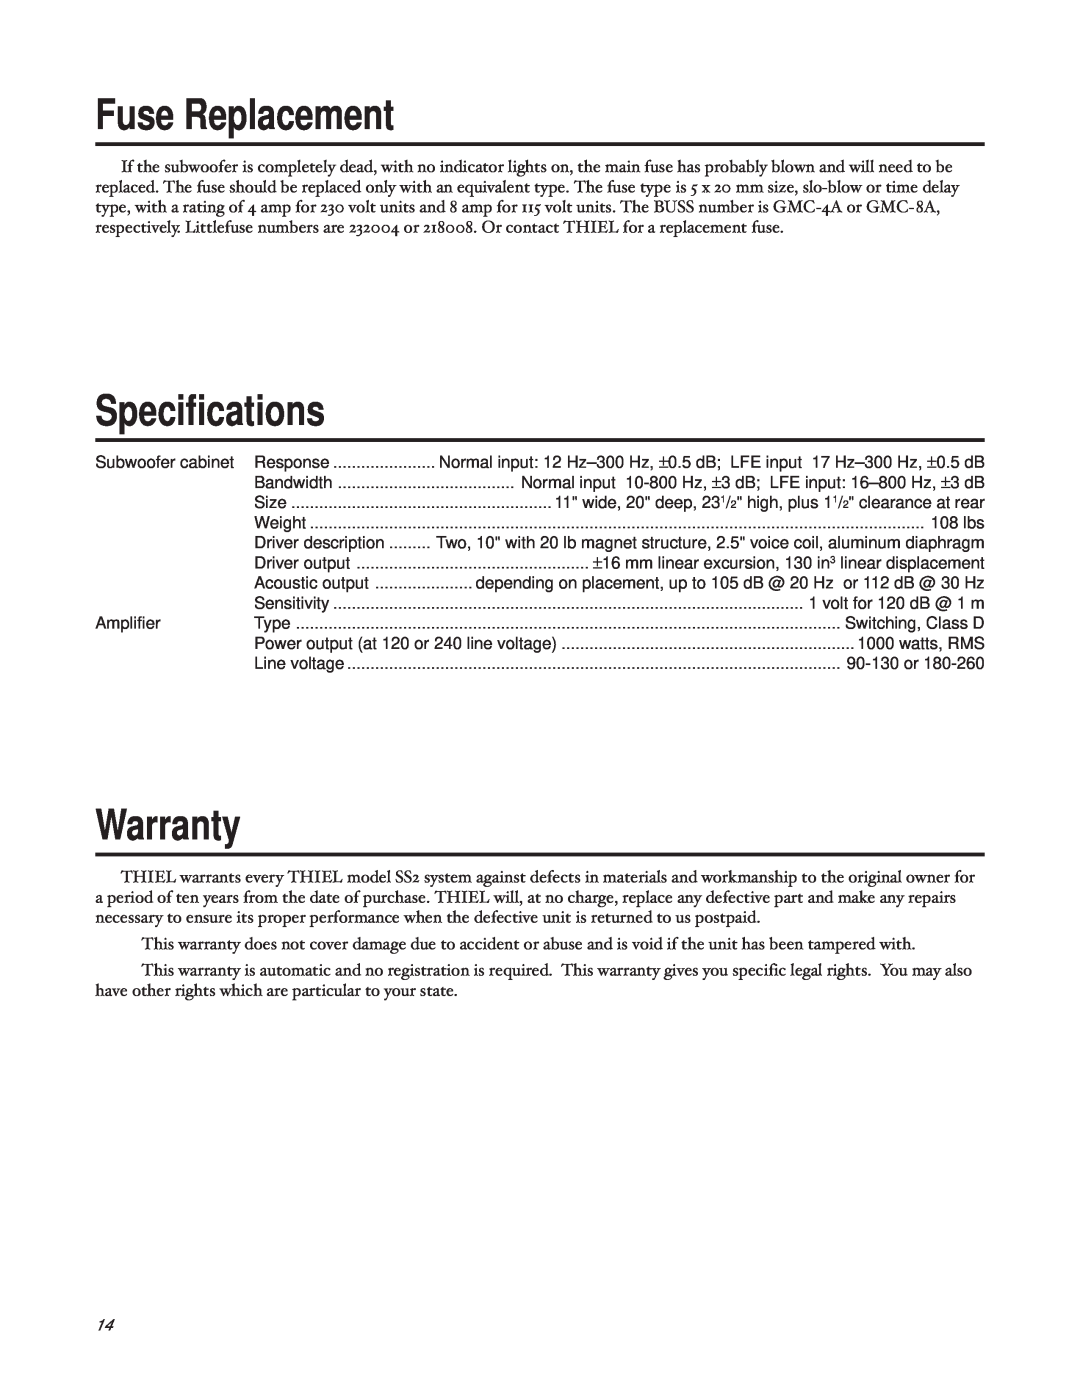 Thiel Audio Products SS2 manual Fuse Replacement, Specifications, Warranty 